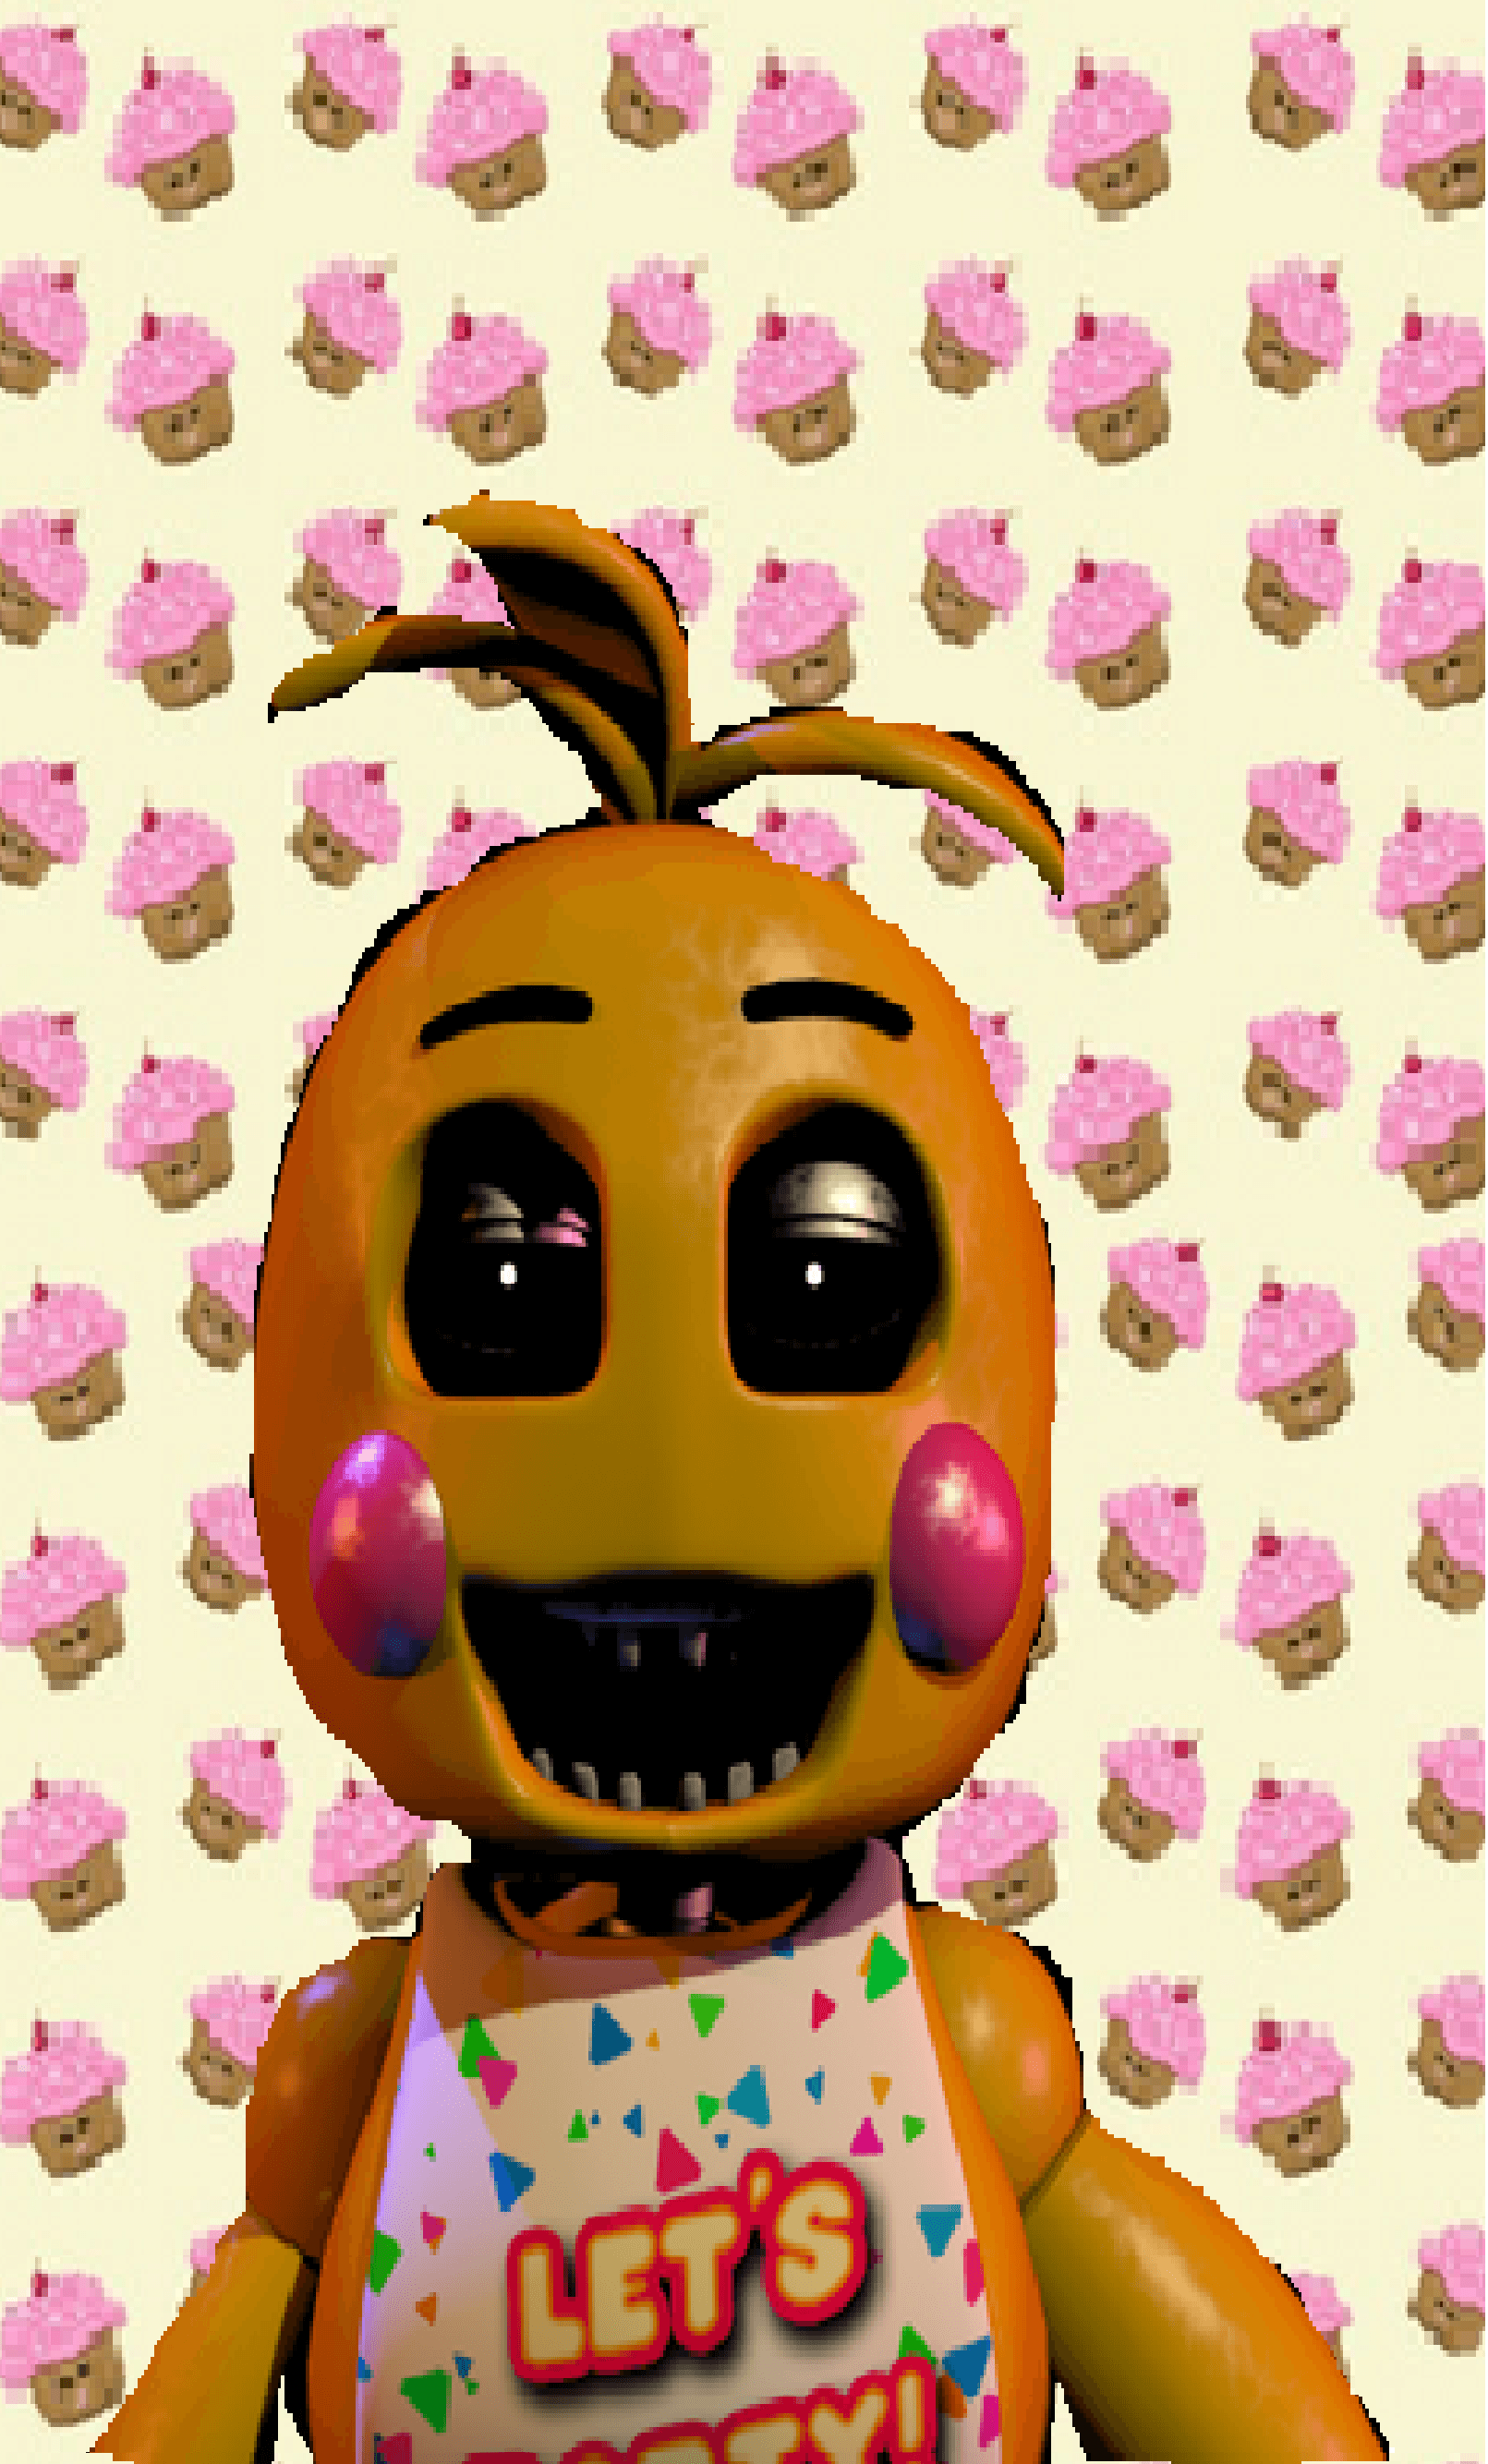 yep!Made another wallpaper!made a toy chica!:) feel free to use